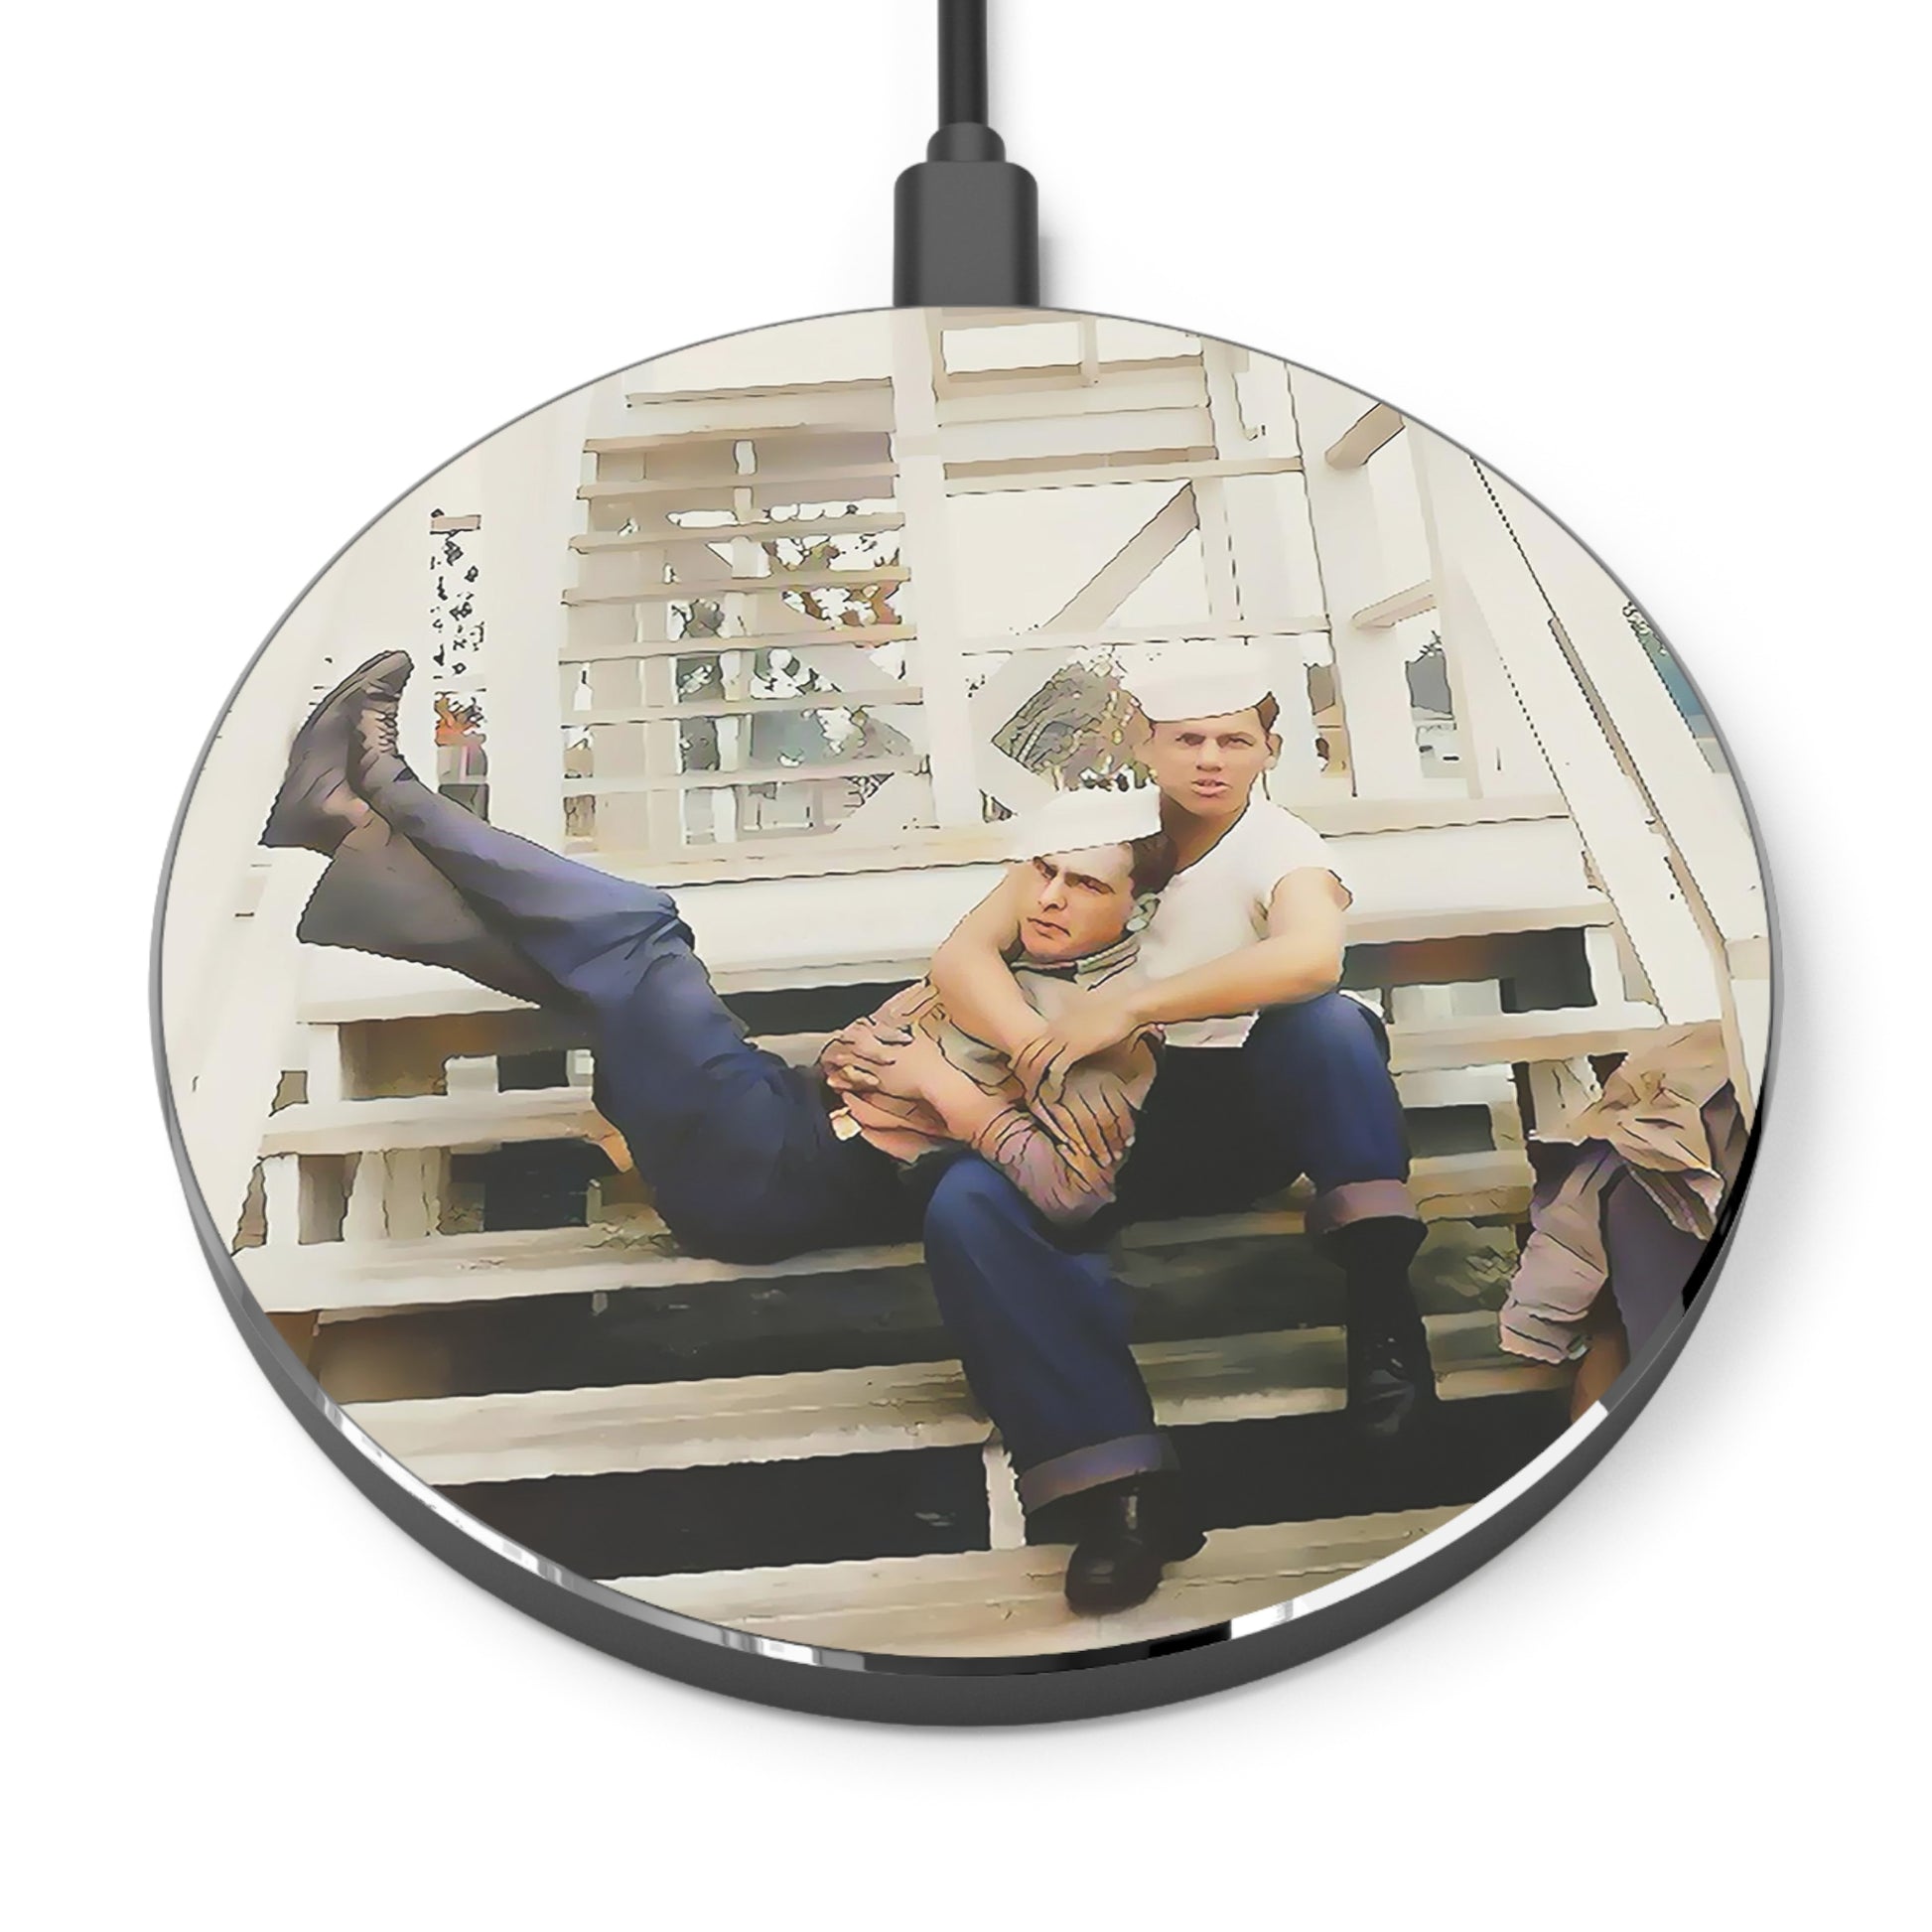 paire 066 | Wireless Charger Vintage Naval Barracks USN Navy Sailors Affectionate Gay Queer Dad Gift